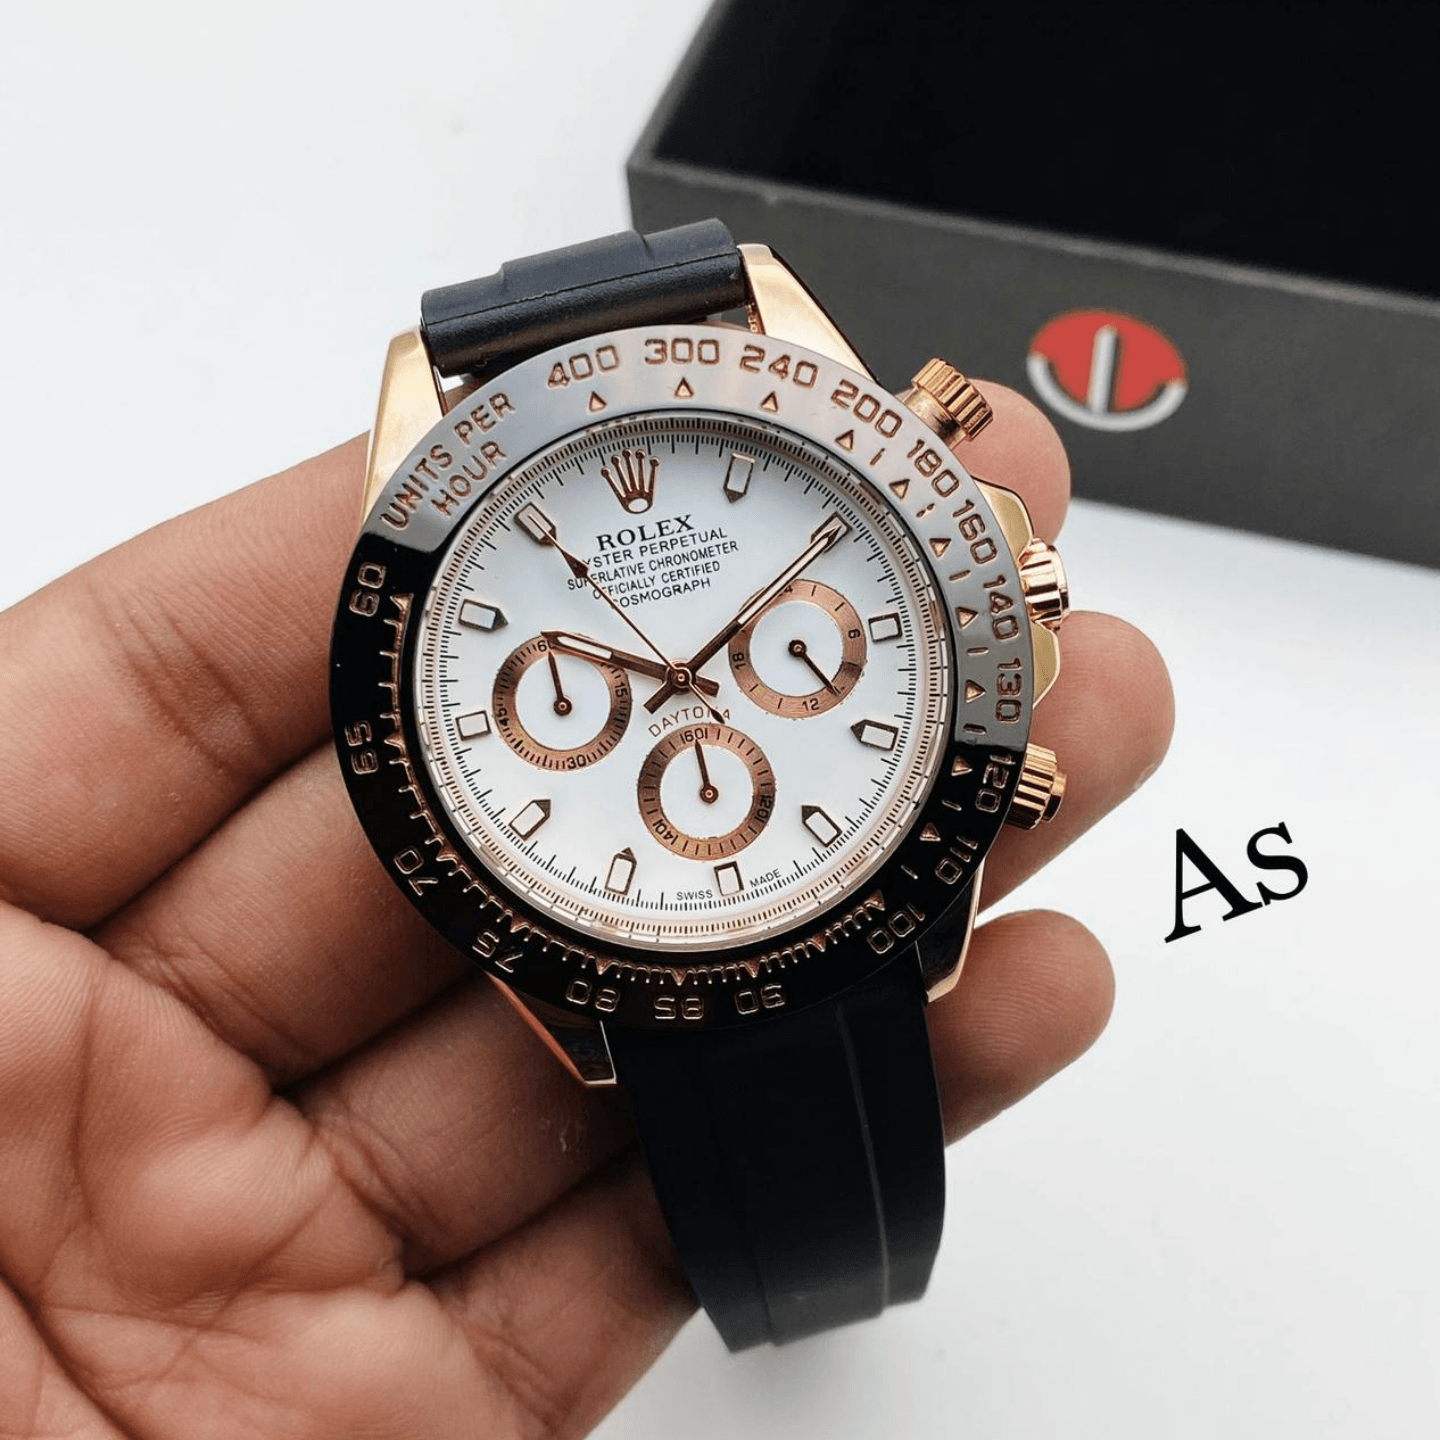  Mens Brown White Dial Rim Rolex Daytona Watch Gift for Wedding , Engagement,anniversary, valentine's day, mother's day for sister, wife,friend,mother, baby shower